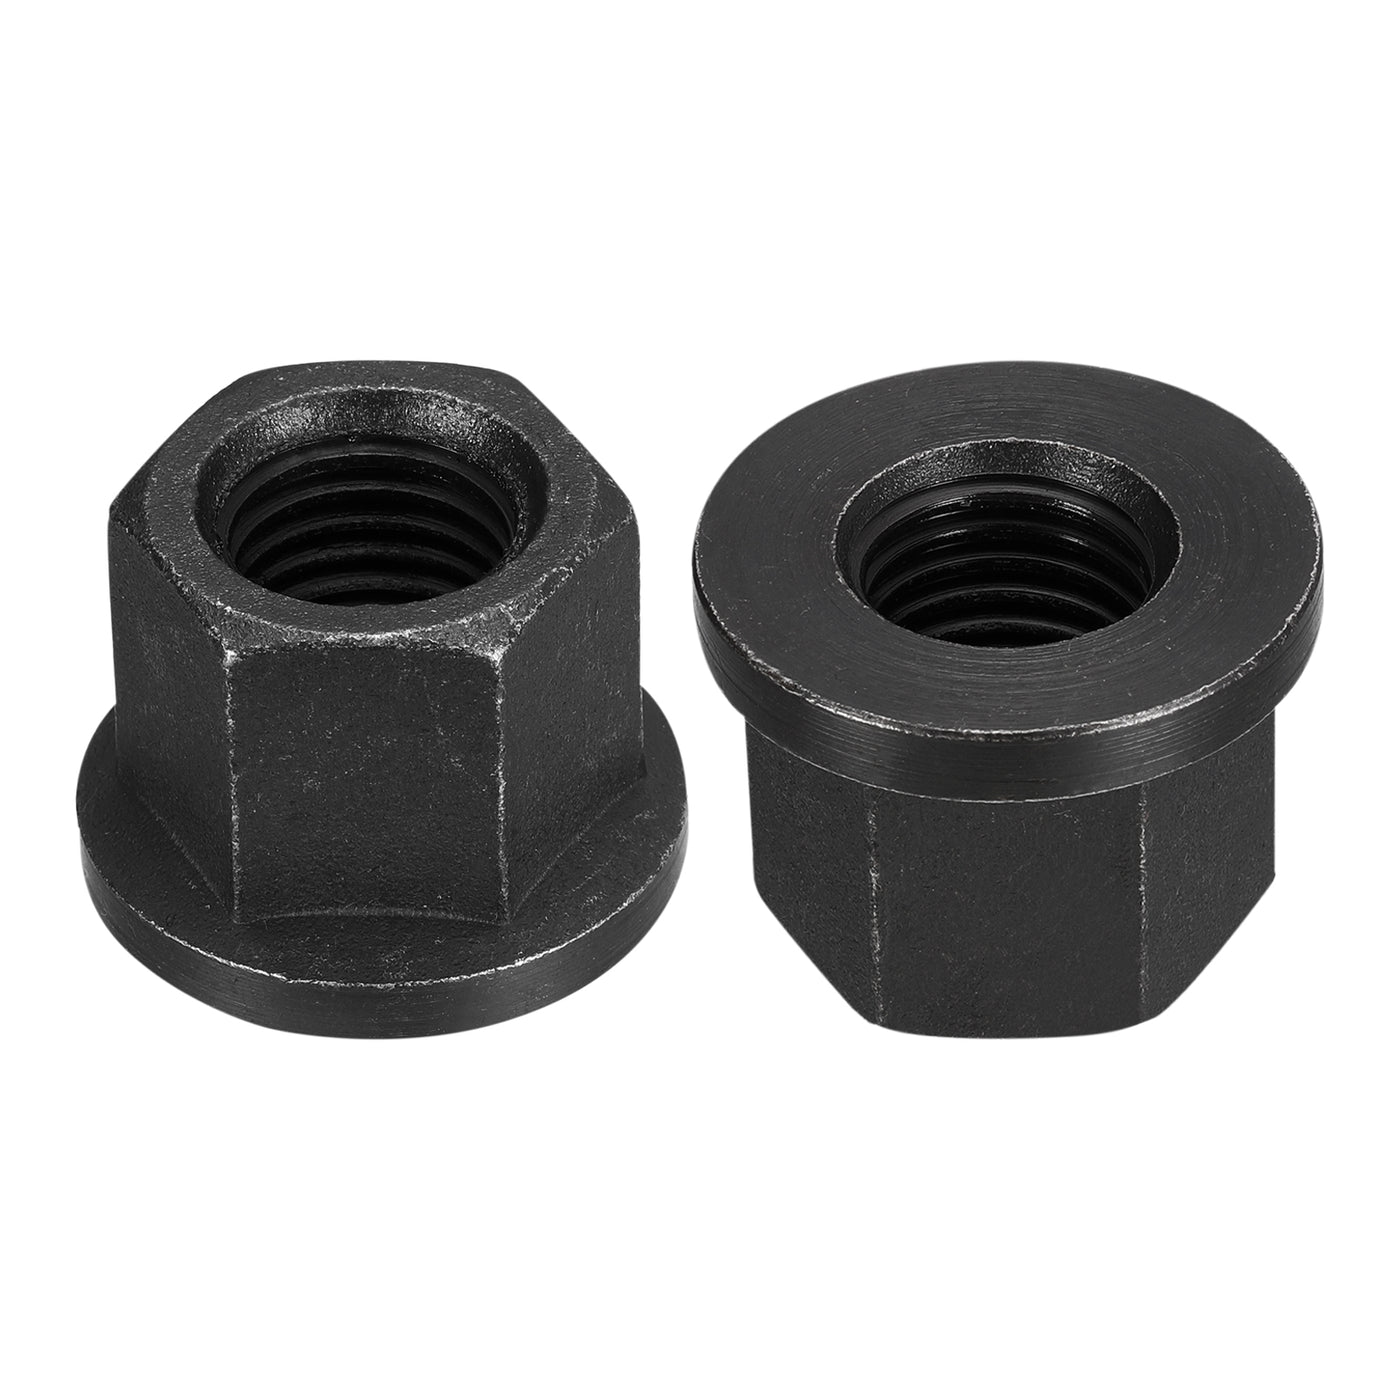 uxcell Uxcell M20 Flange Hex Lock Nuts, 2pcs Grade 8.8 Carbon Steel Hex Flange Nuts